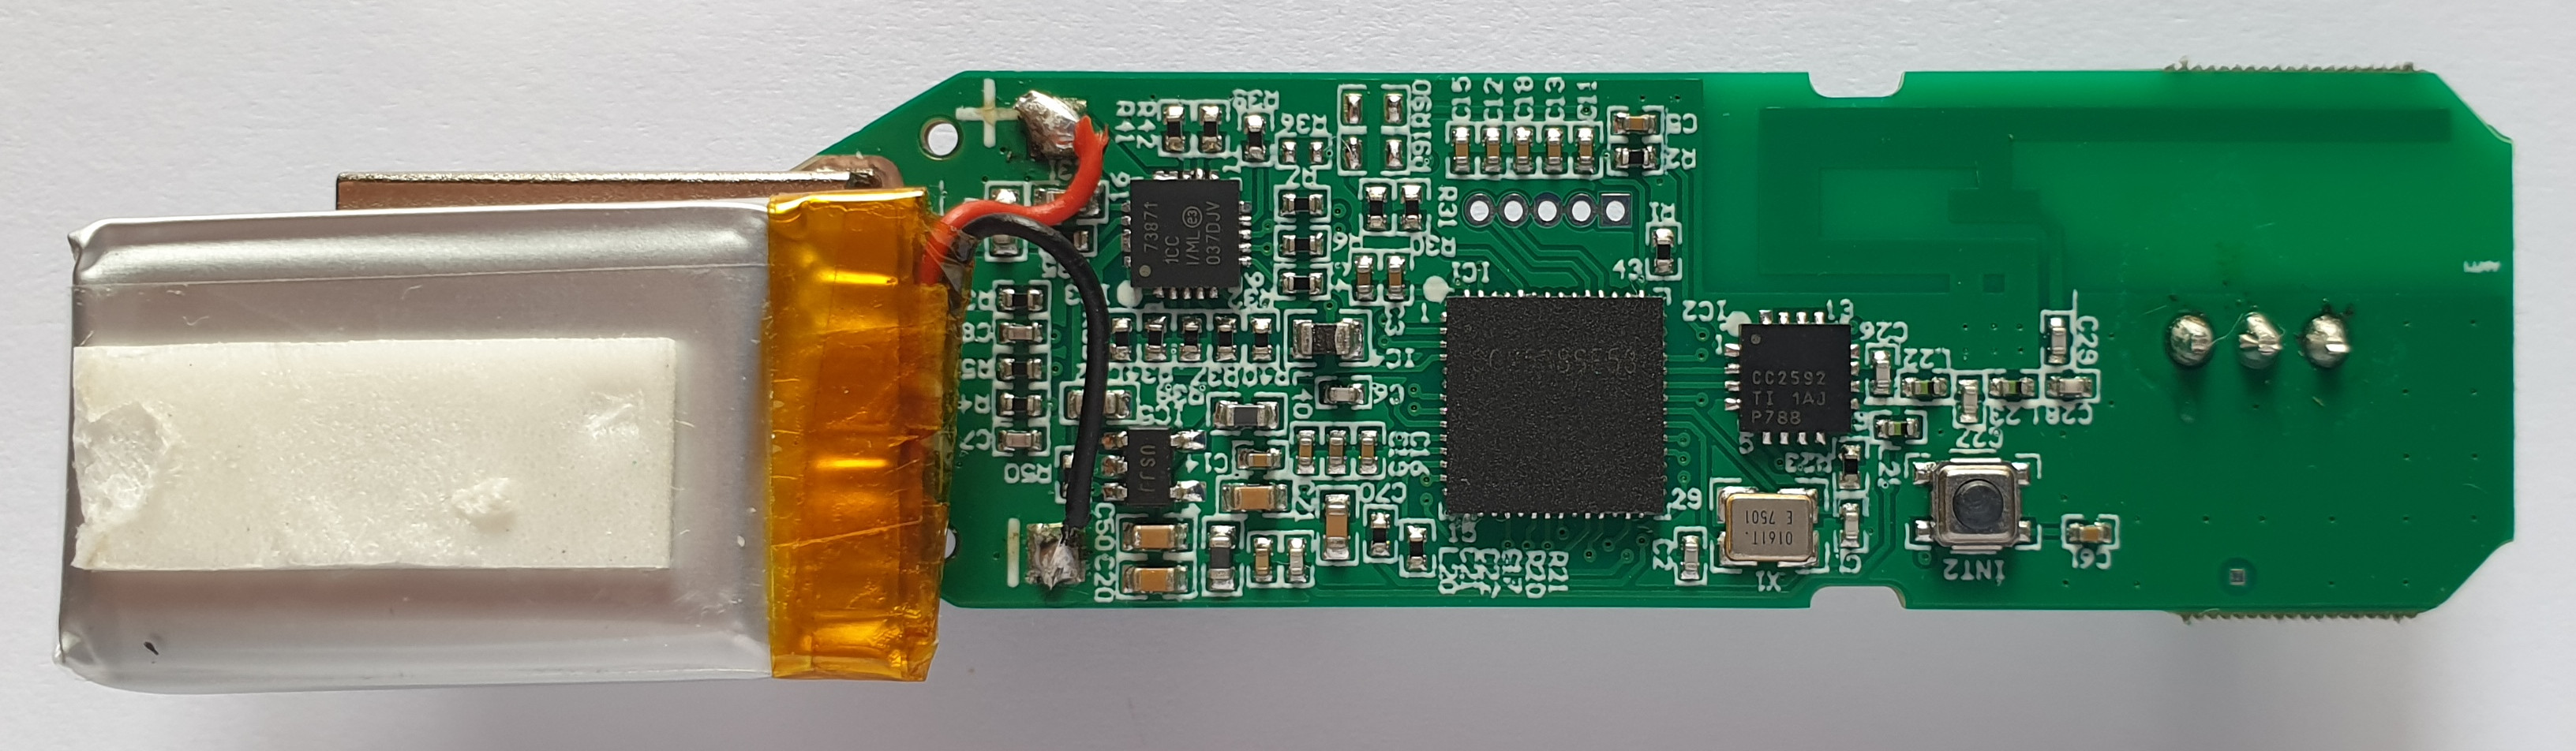 Gateway PCB bottom, with ICs visible (high-res)